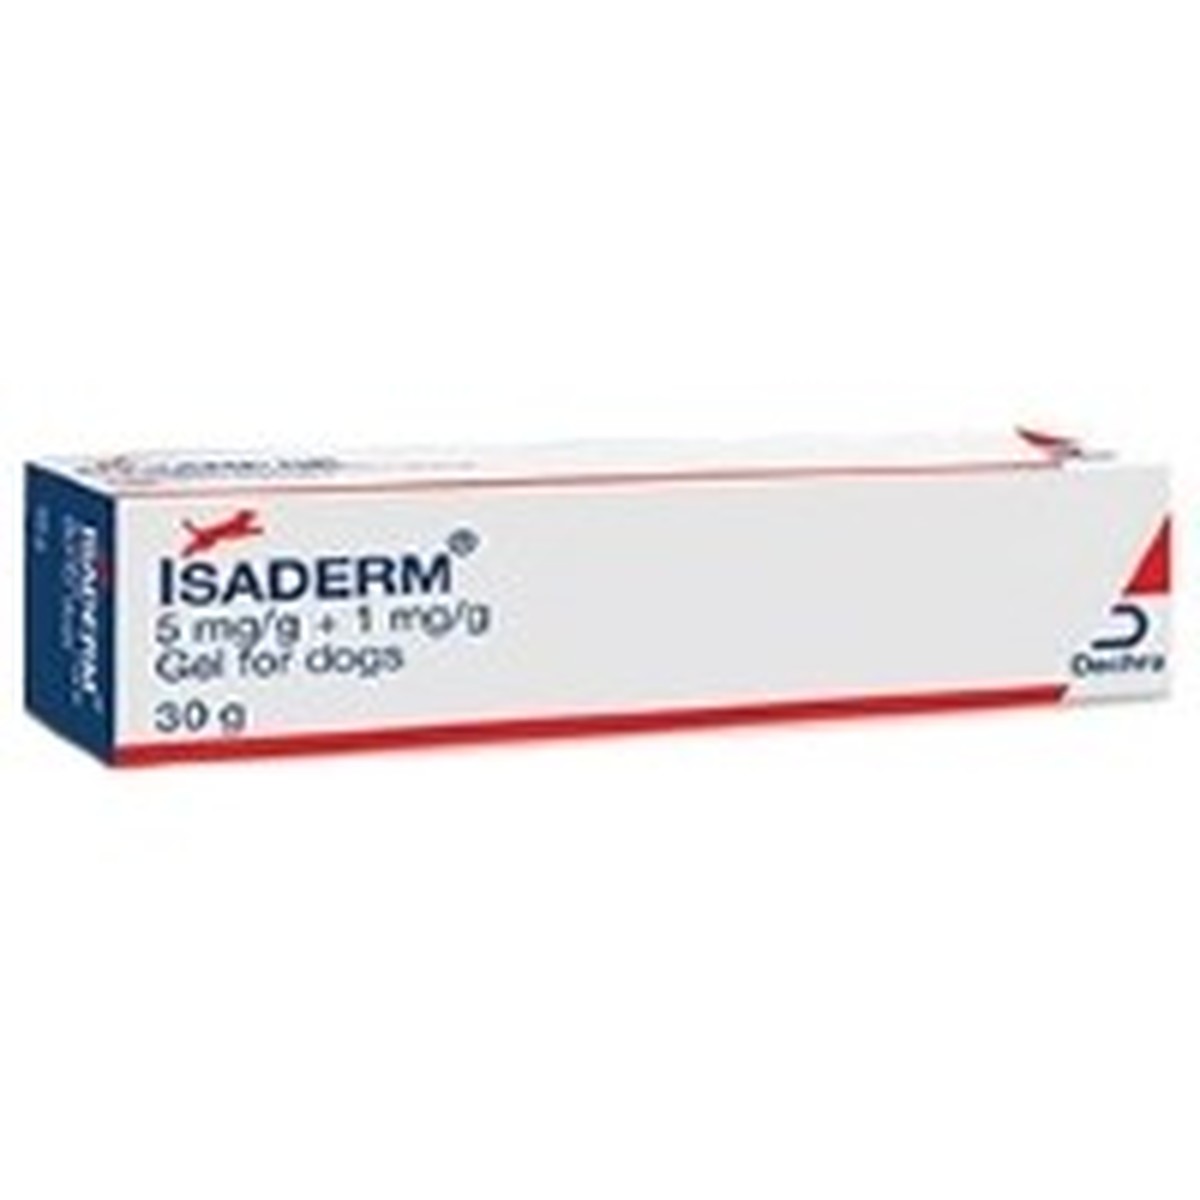 isaderm gel for dogs